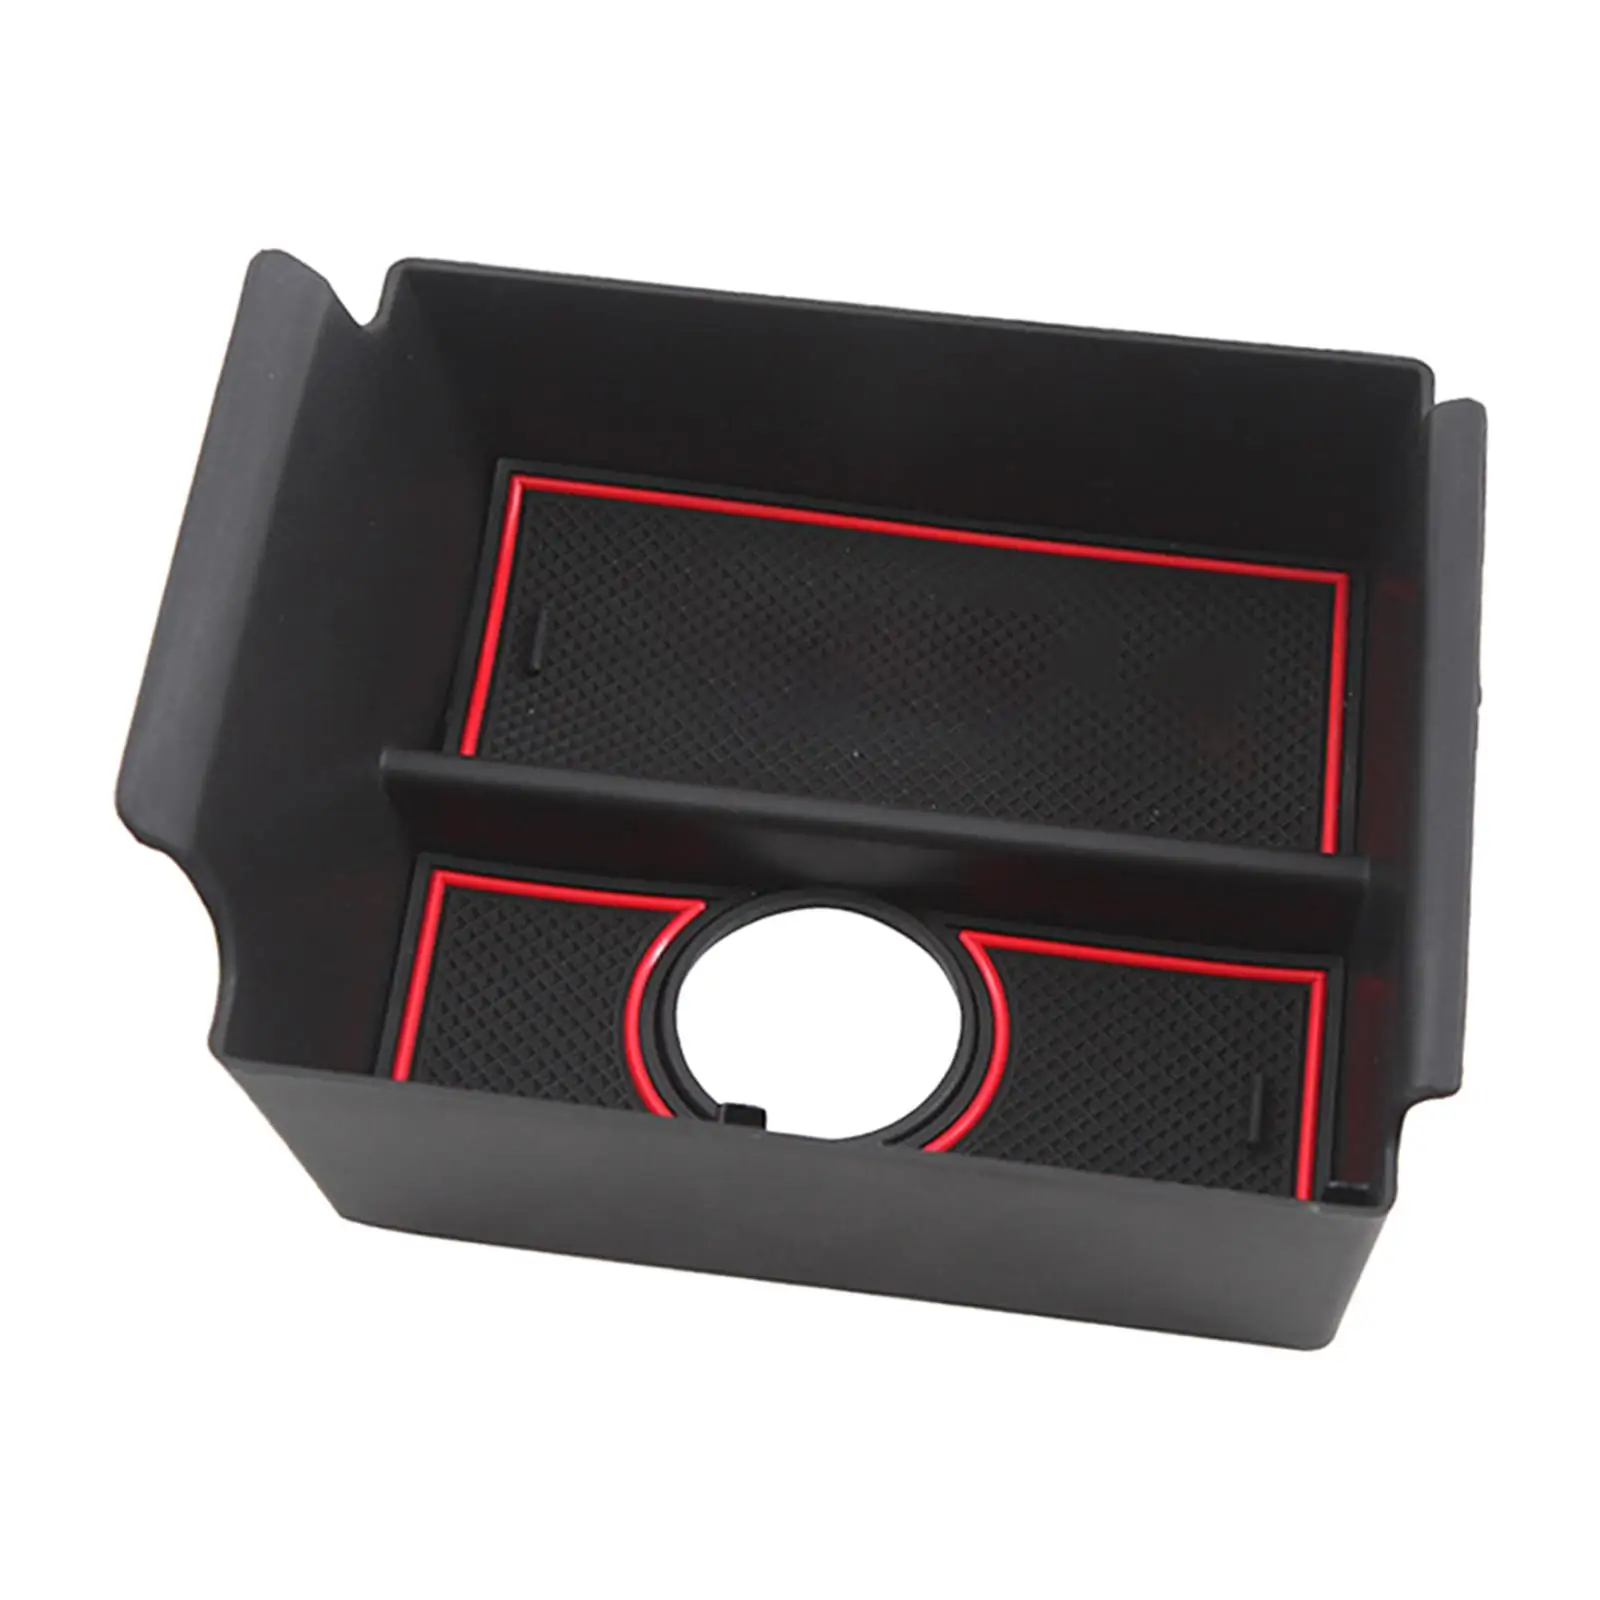 Car Armrest Storage Box Interior Accessory Container Lightweight Center Console Tray Organizer for Byd Atto 3 Yuan Plus